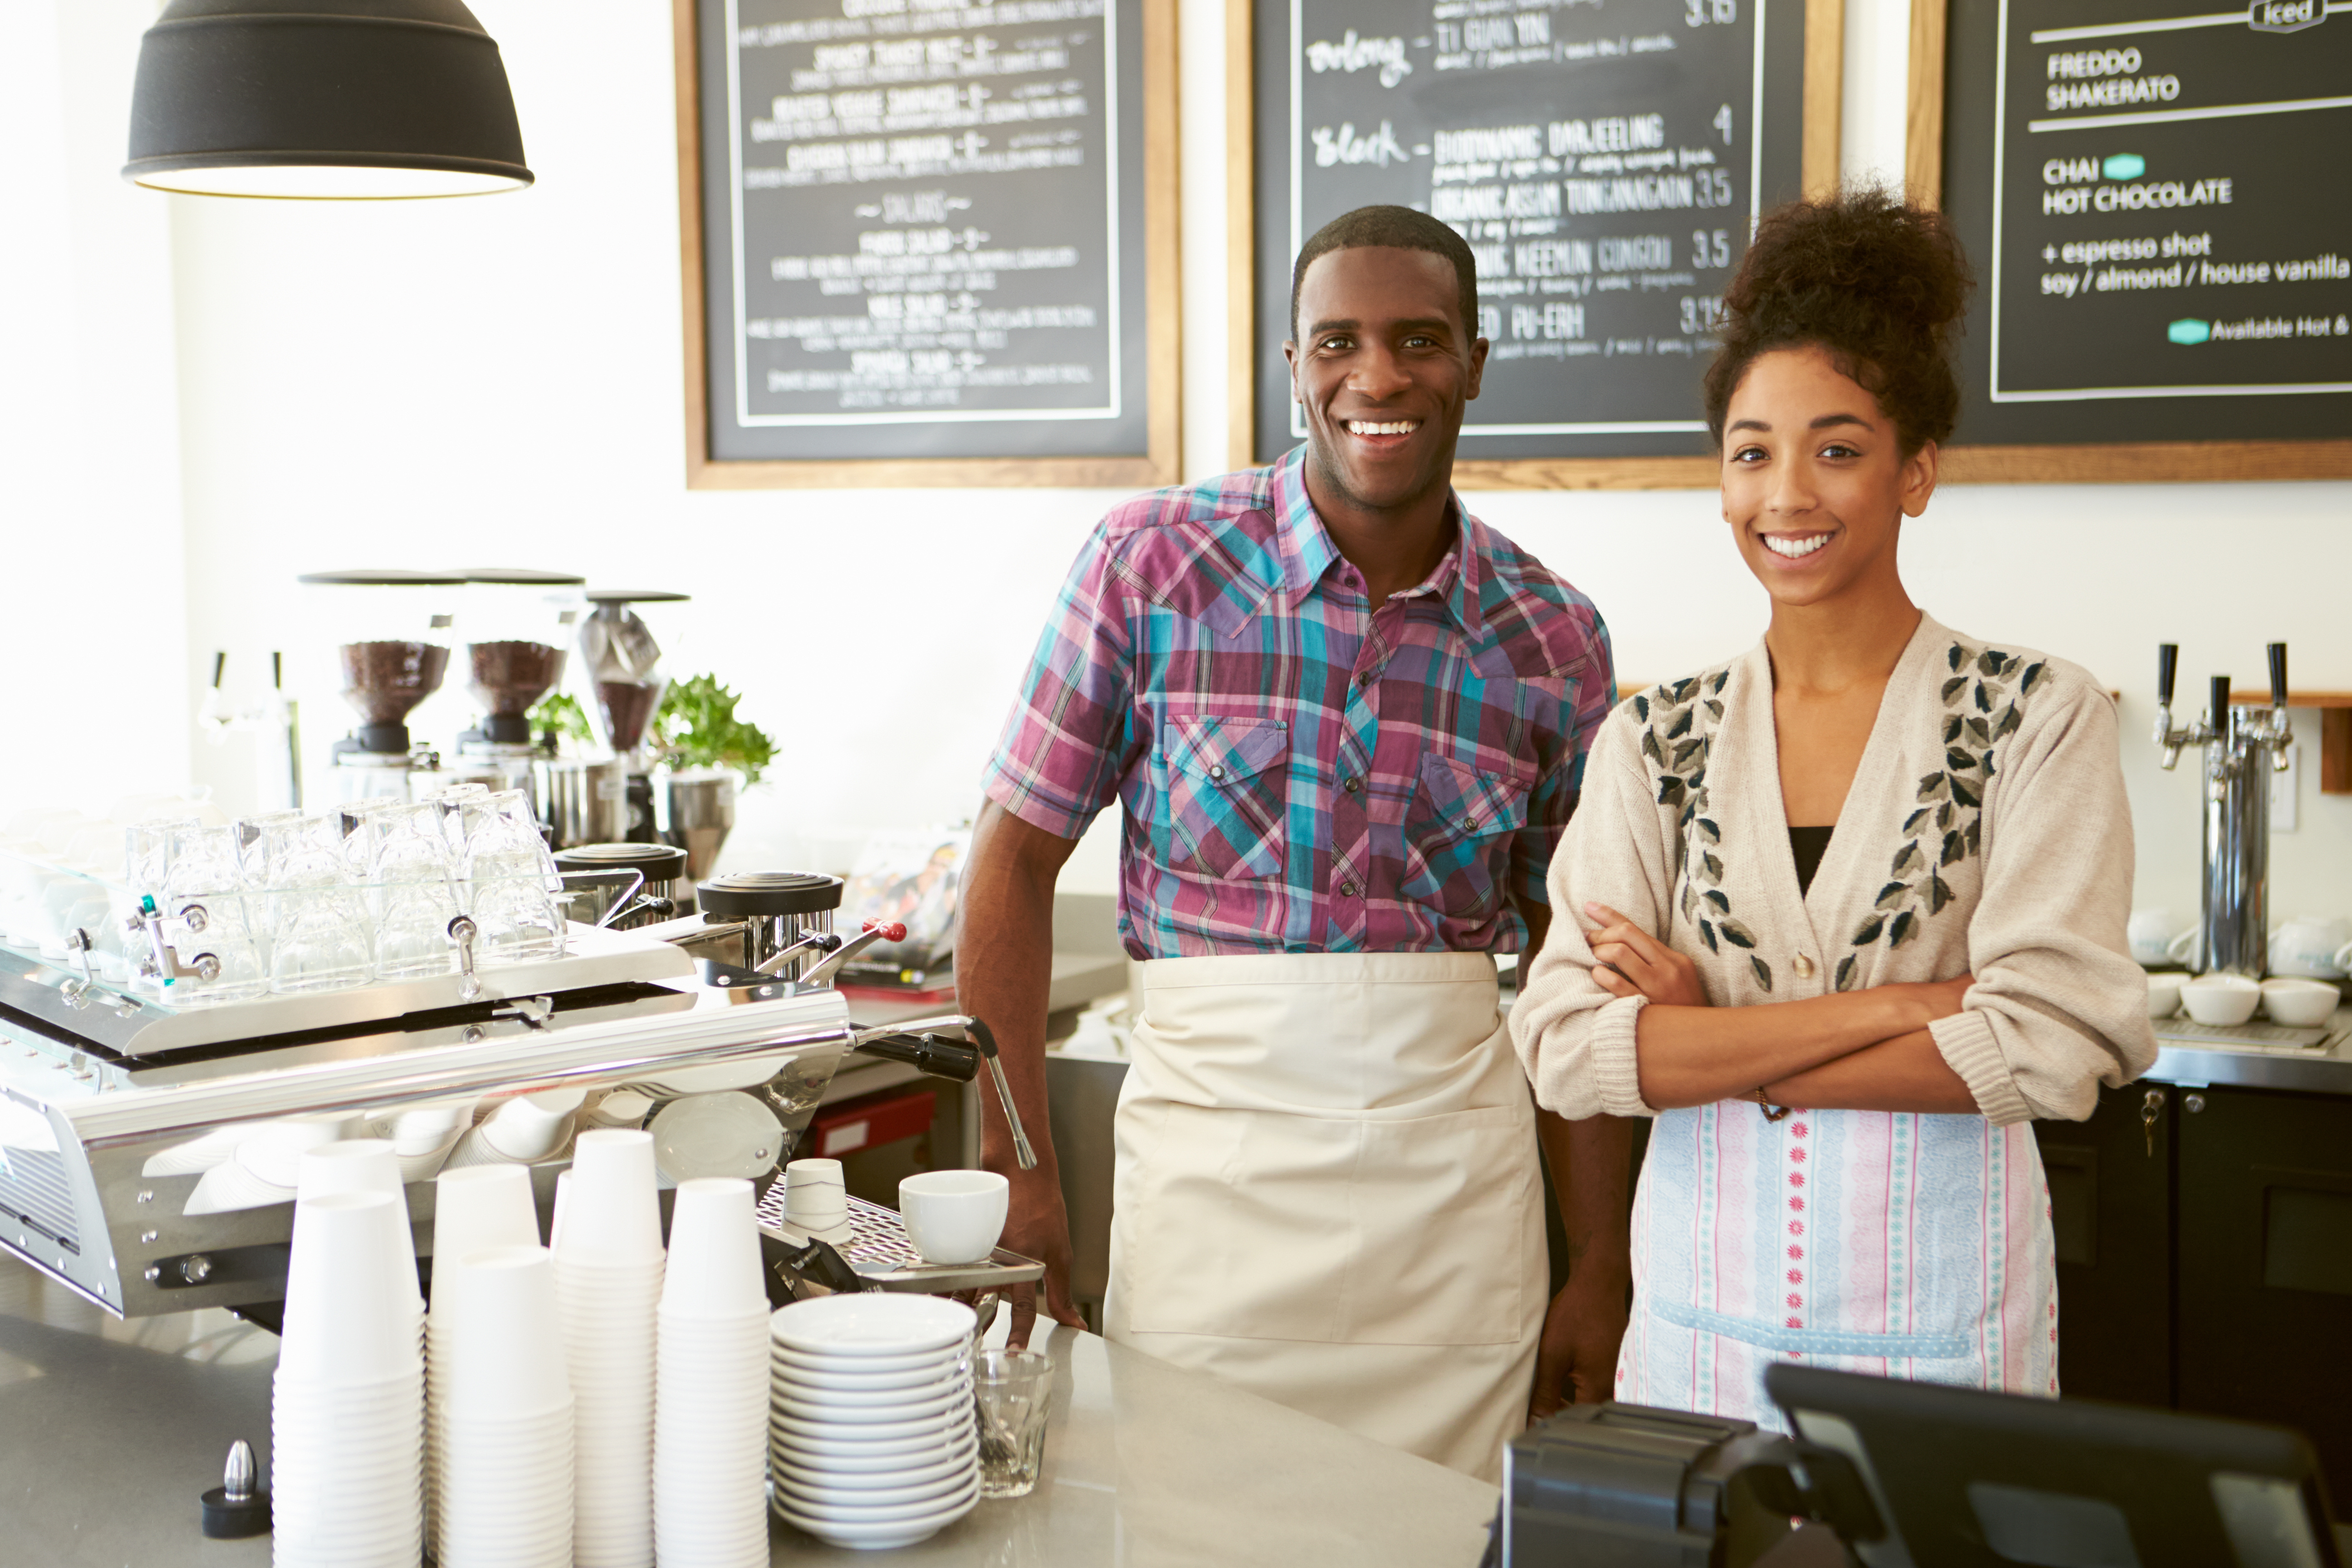 Shop owner. Small Business and Entrepreneurship. Entrepreneur Coffee shop. Small Business owner.